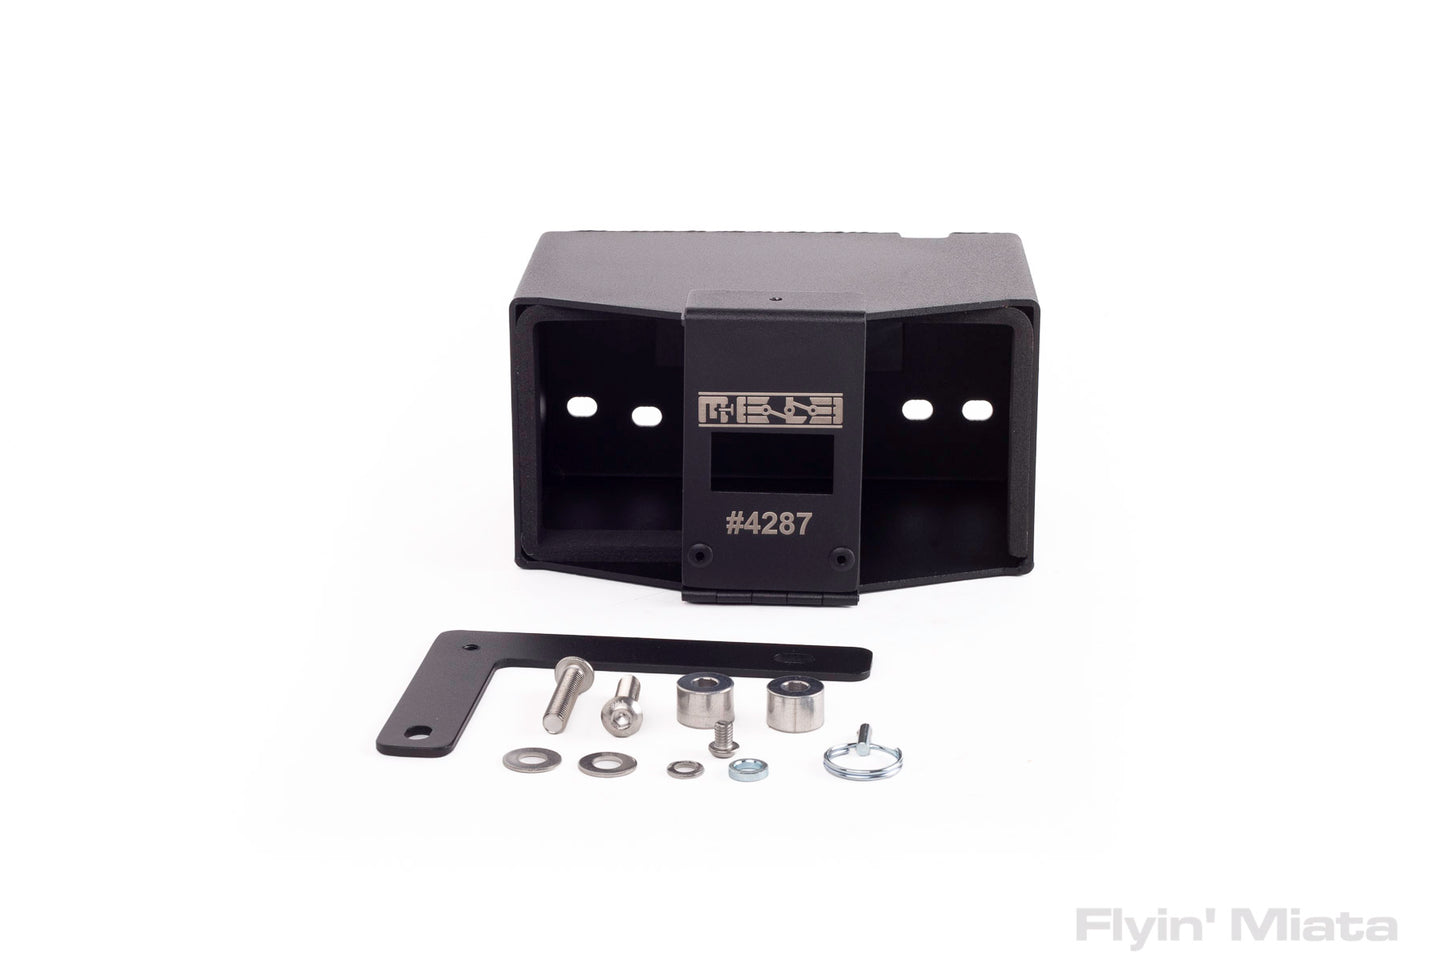 ND lithium battery and mount kit